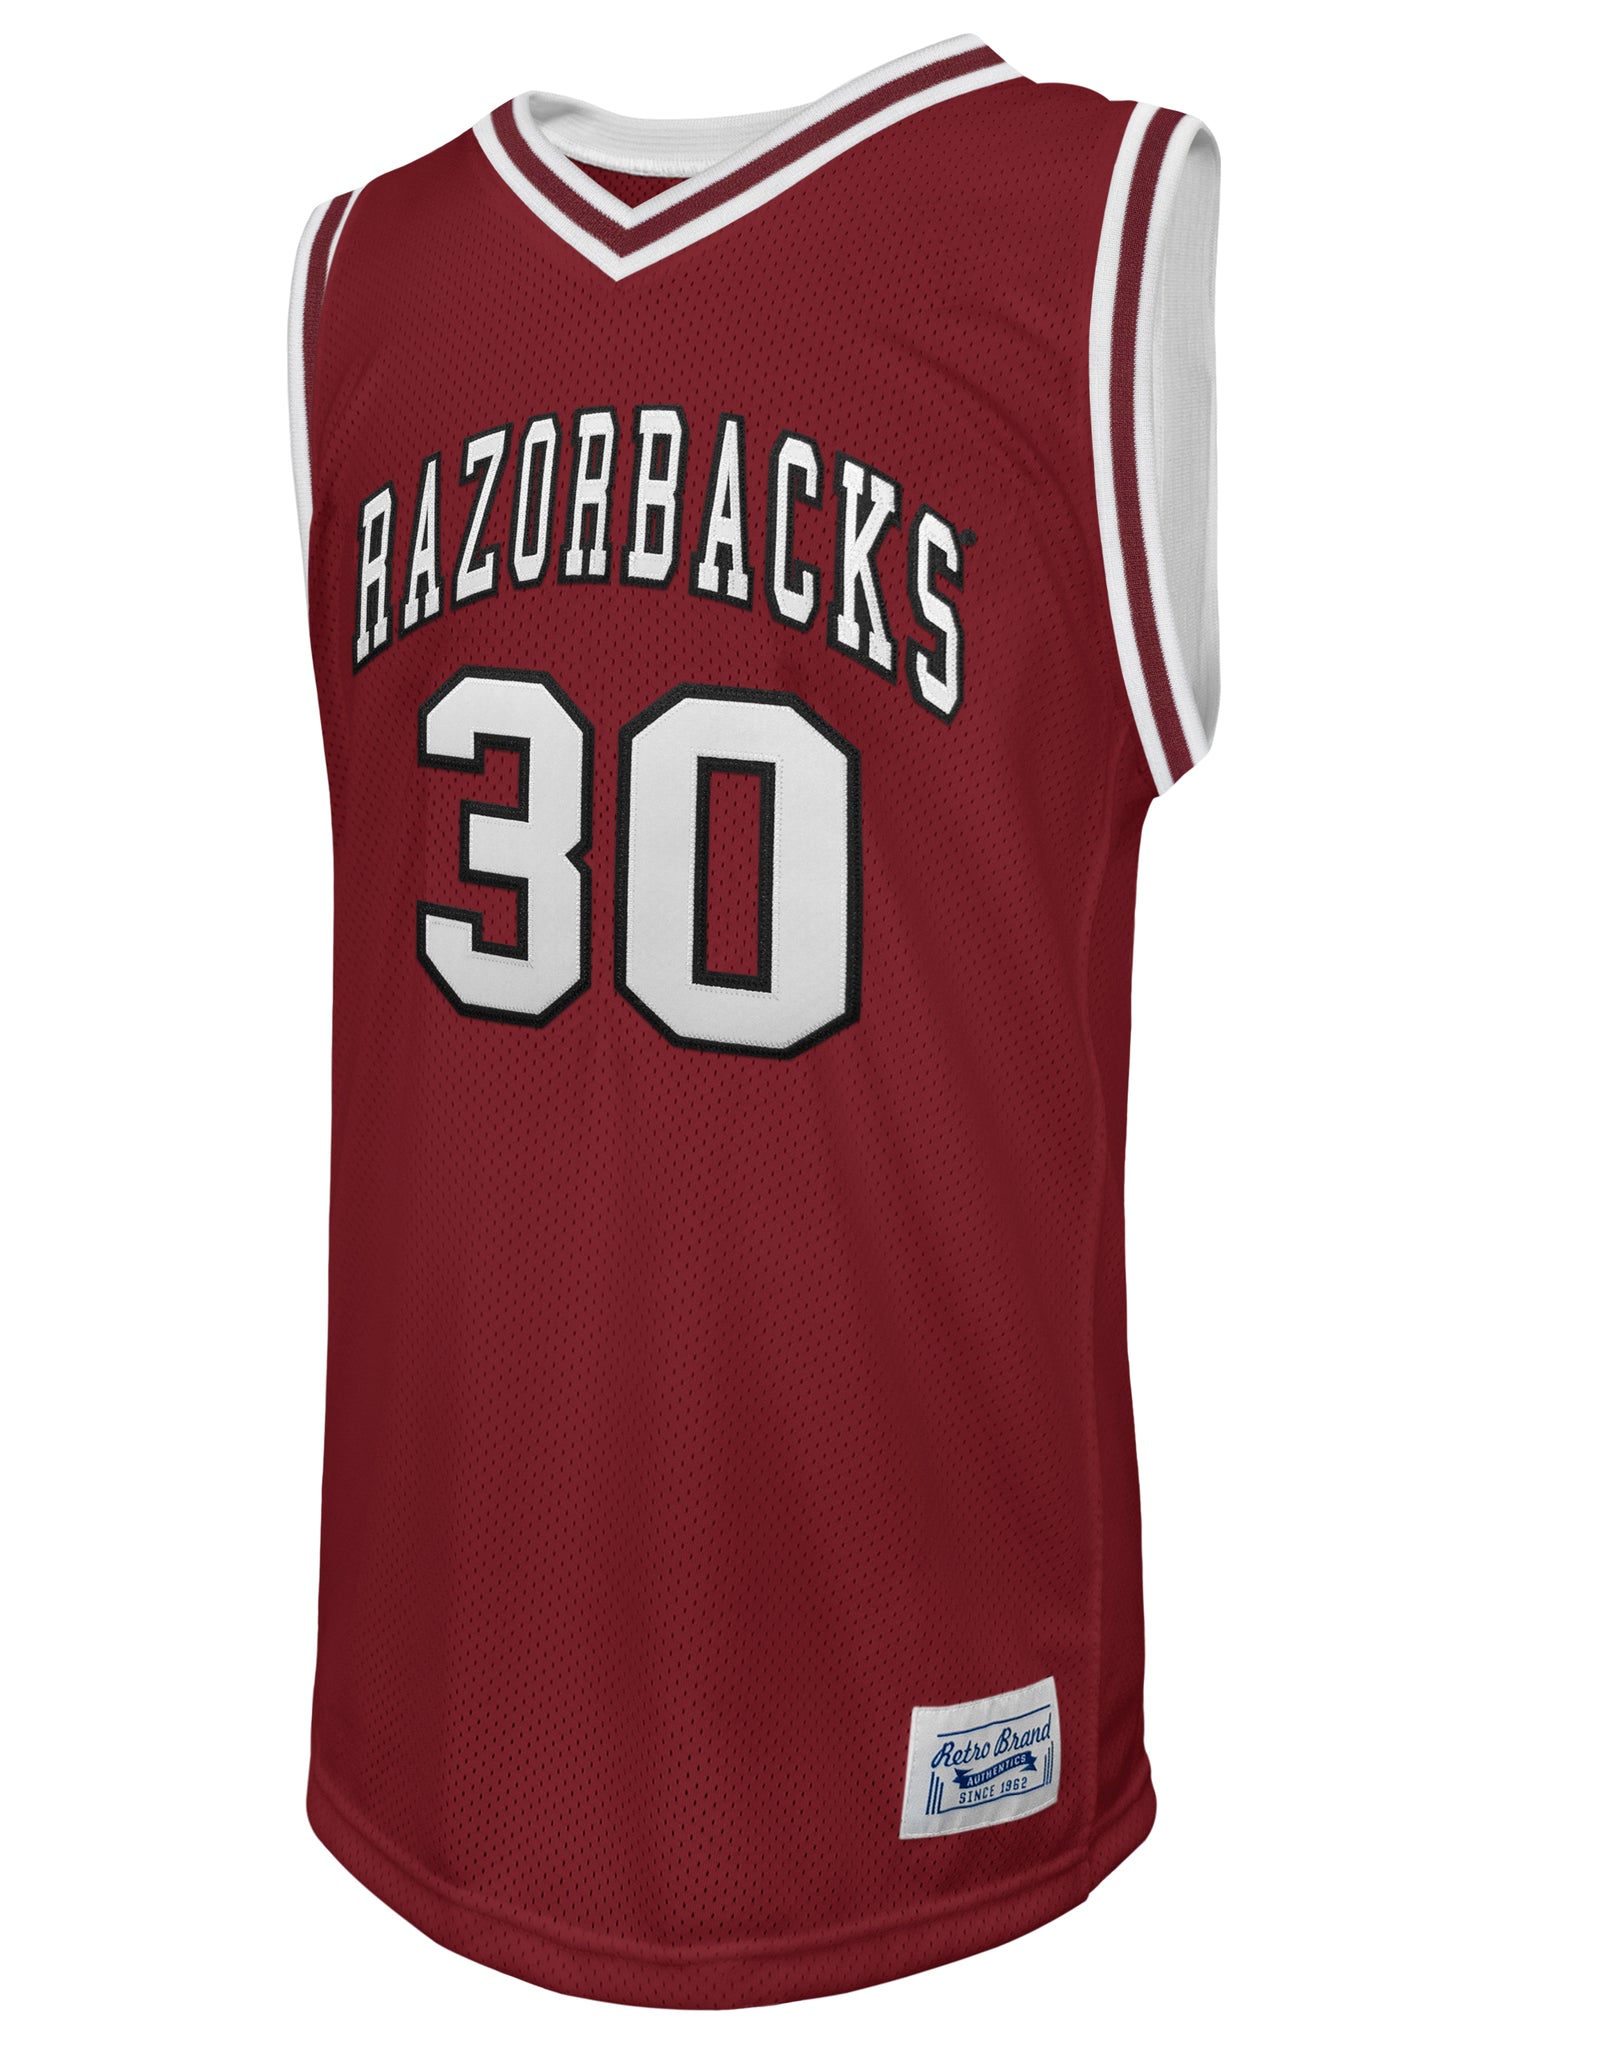 NBA Throwback Jersey Gift Guide For All 30 Teams - Page 7